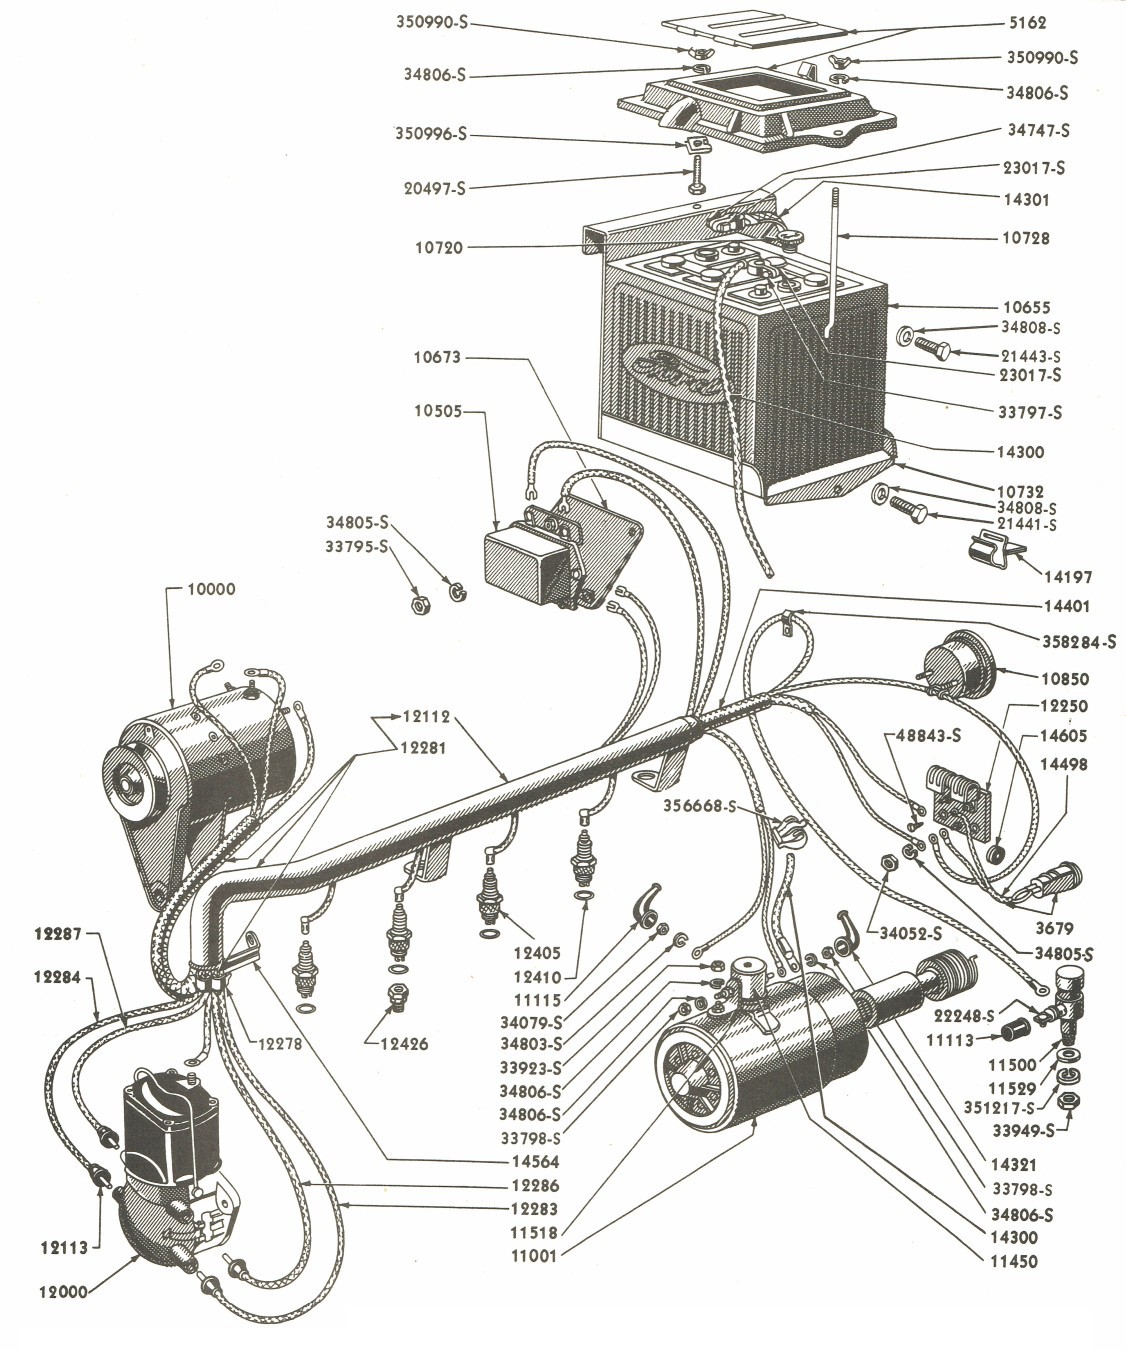 9N Ford Tractor Wiring Diagram from mainetreasurechest.com